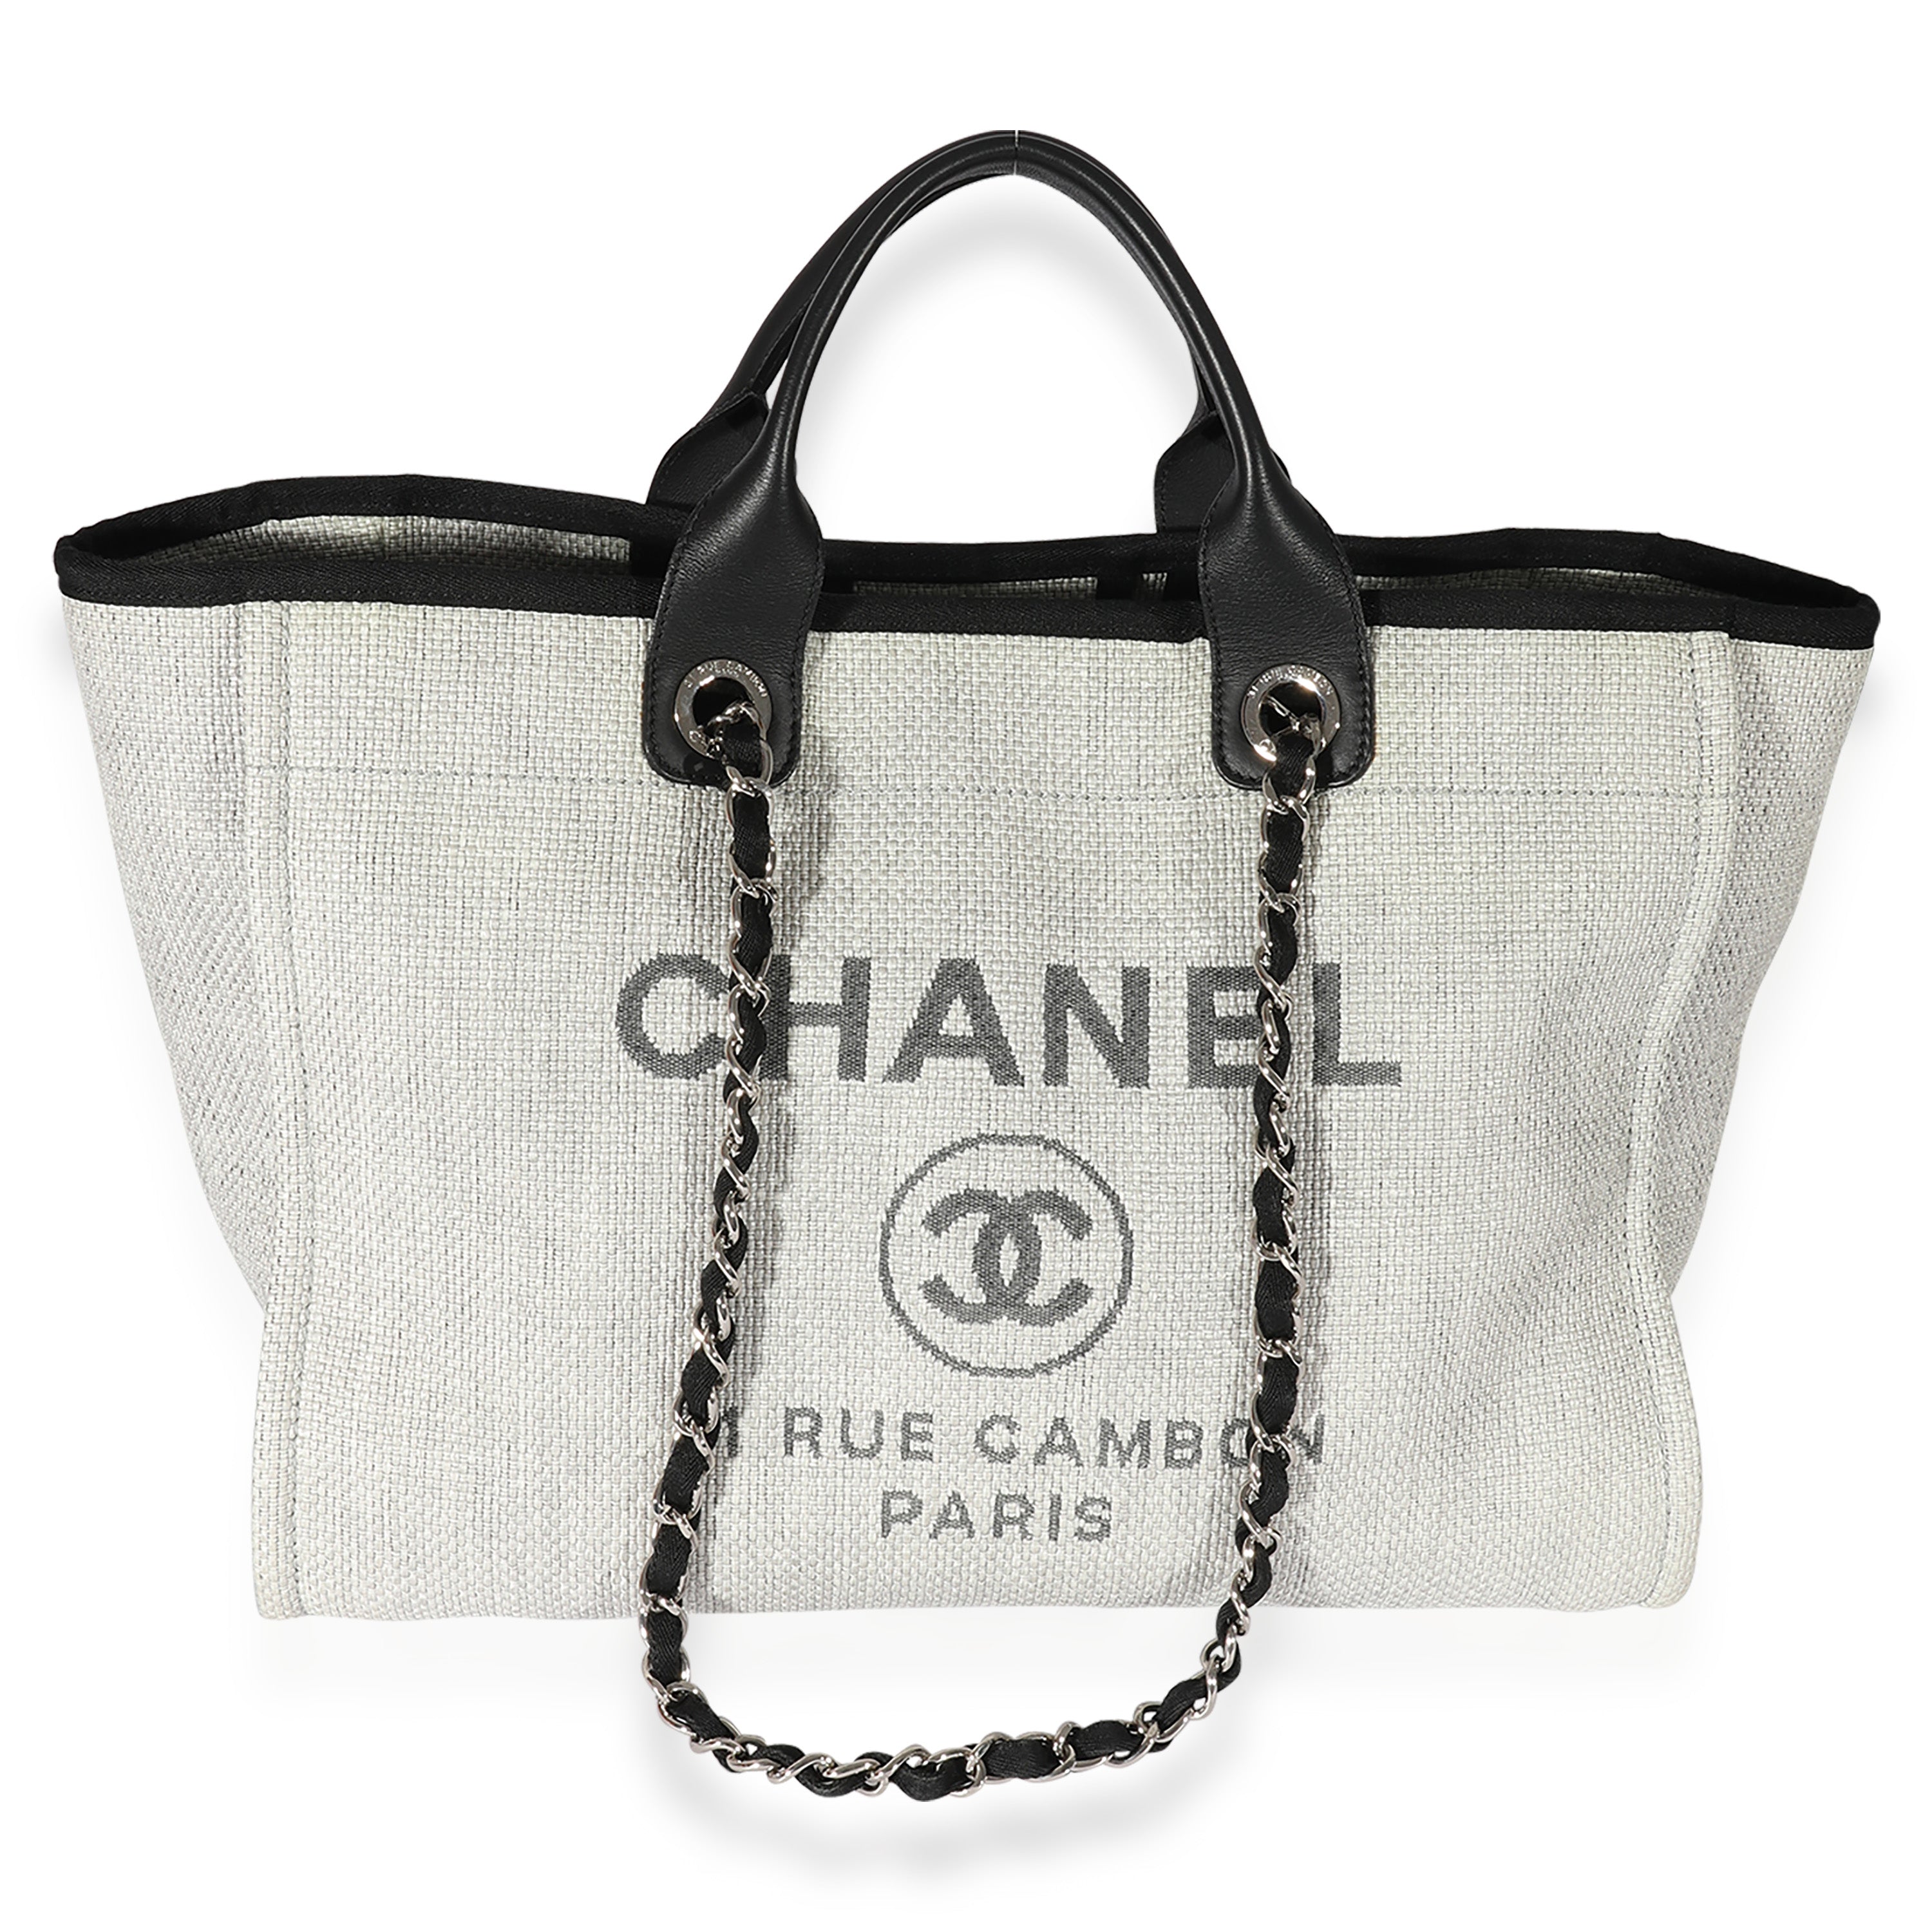 CHANEL Deauville Tote Pink Canvas Large Silver Hardware 2016